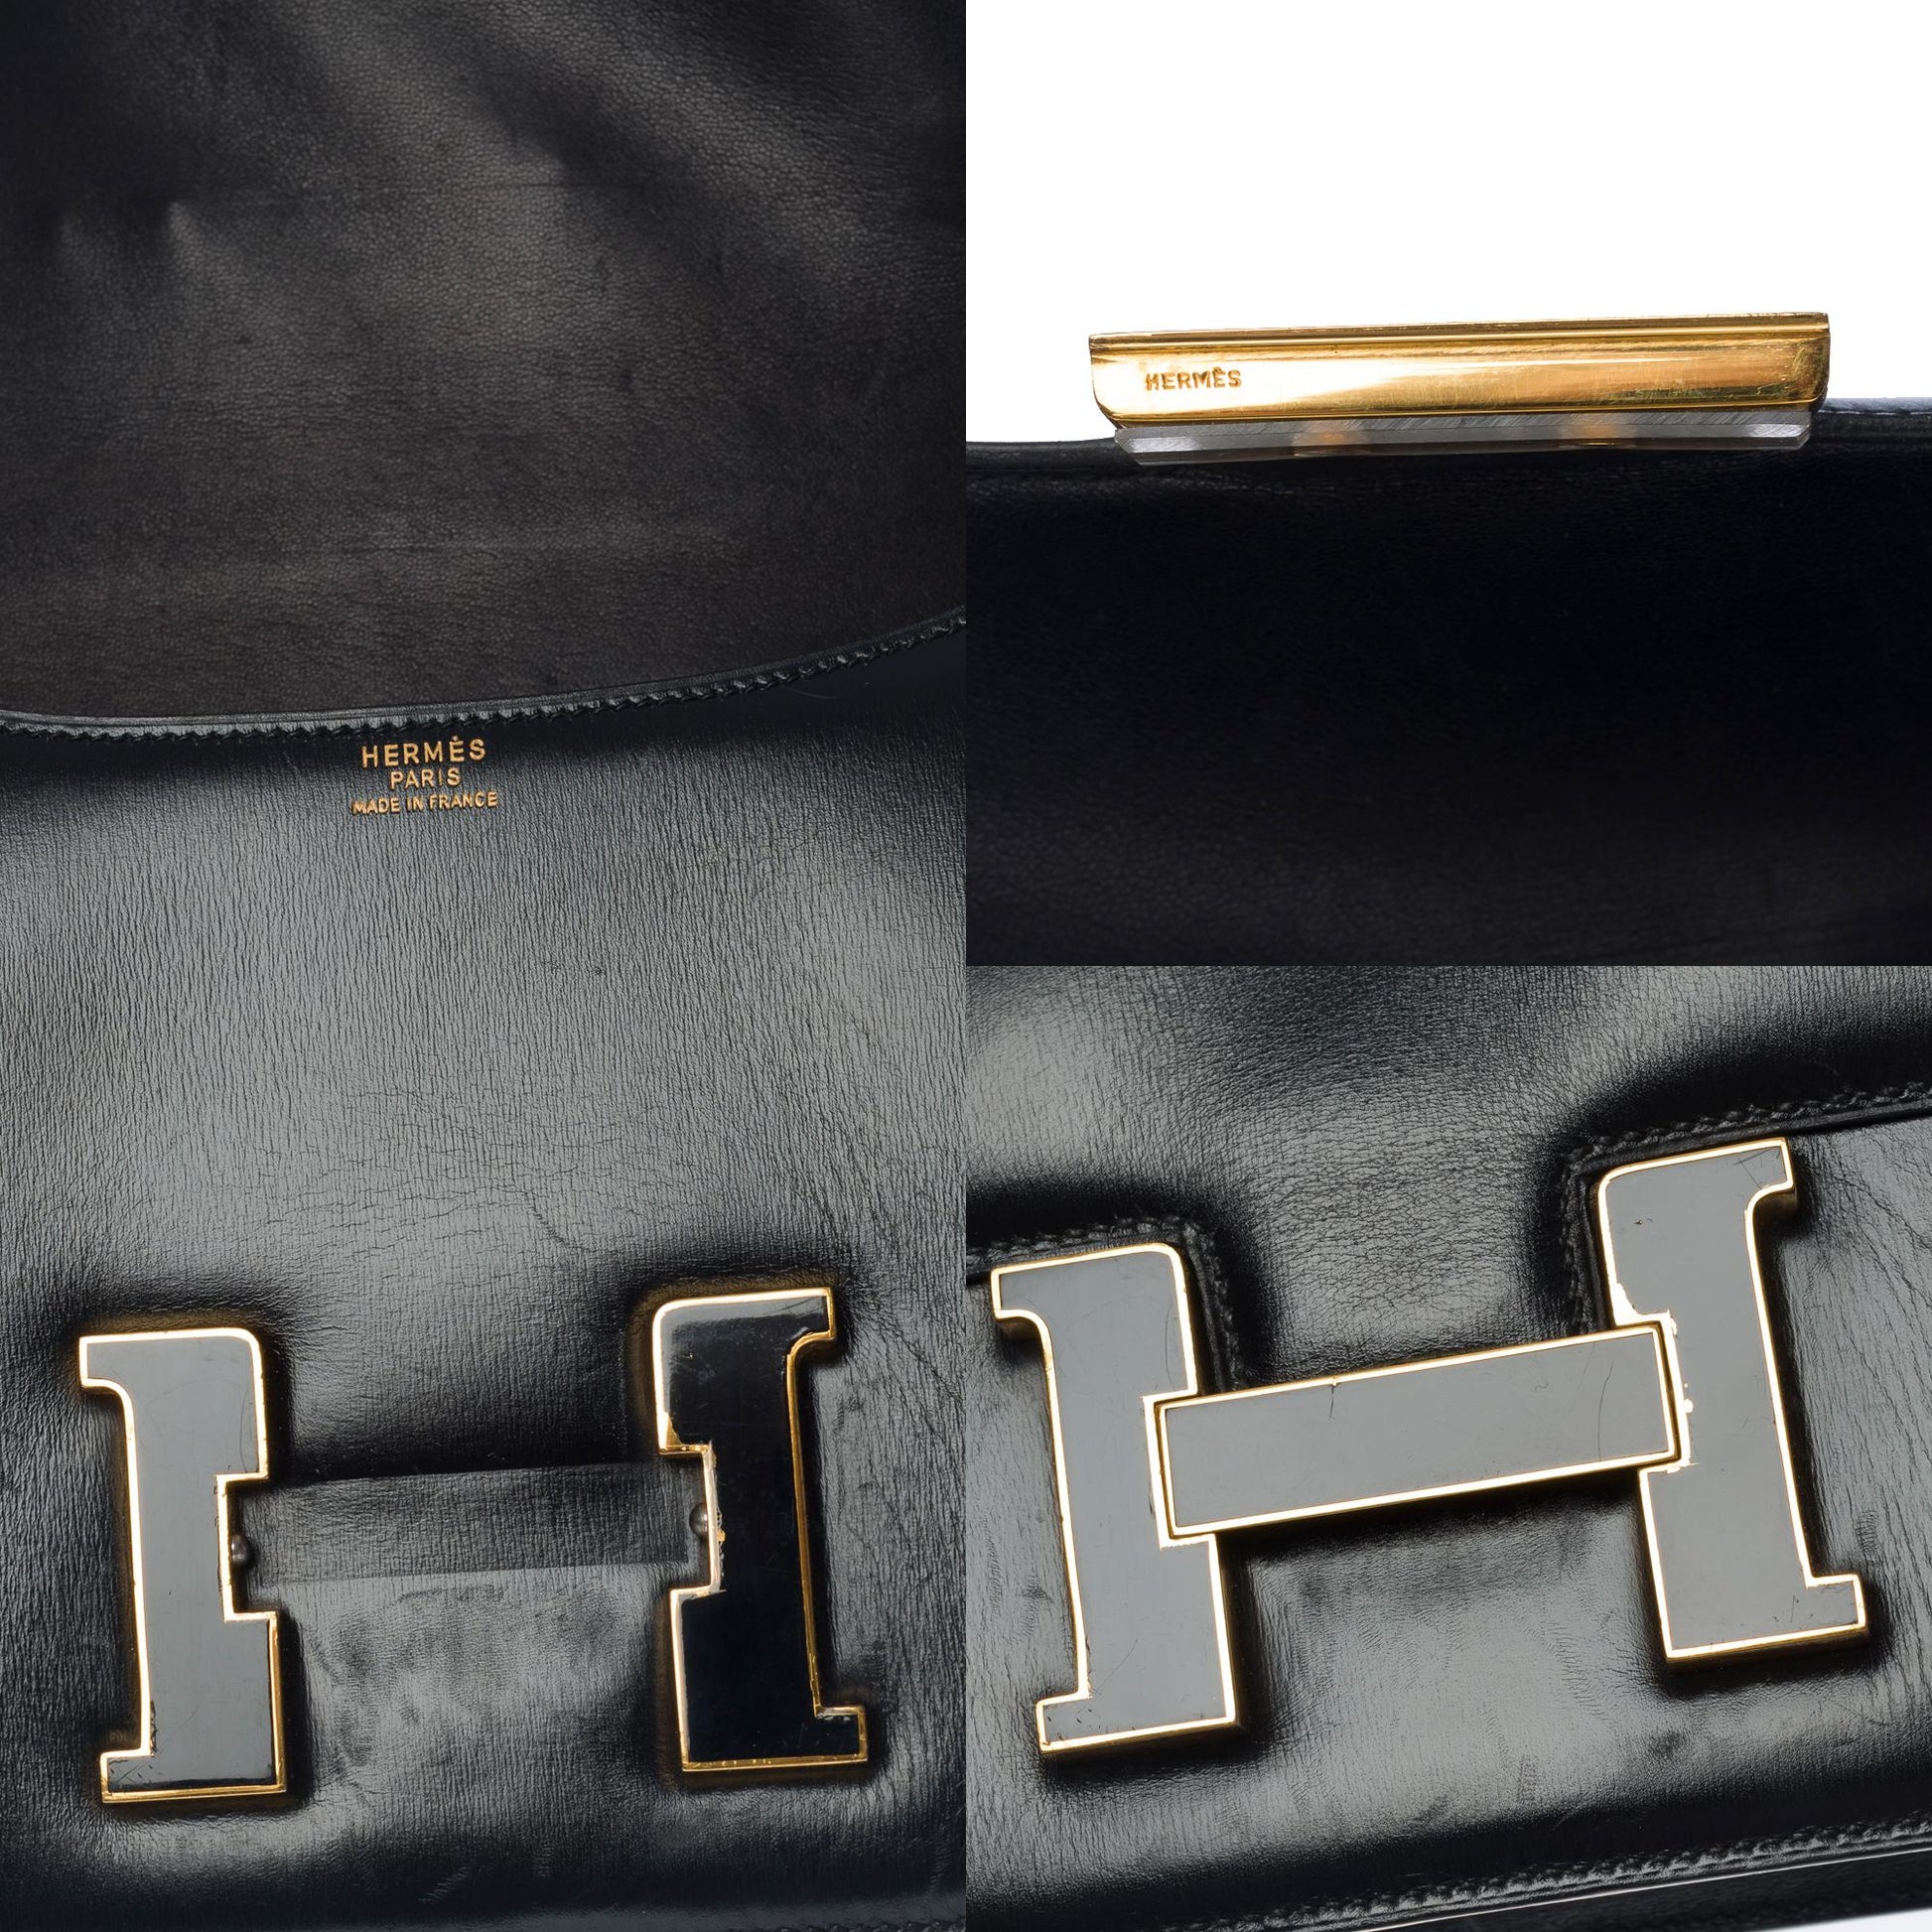 A ROUGE H CALF BOX LEATHER CONSTANCE 23 WITH GOLD HARDWARE